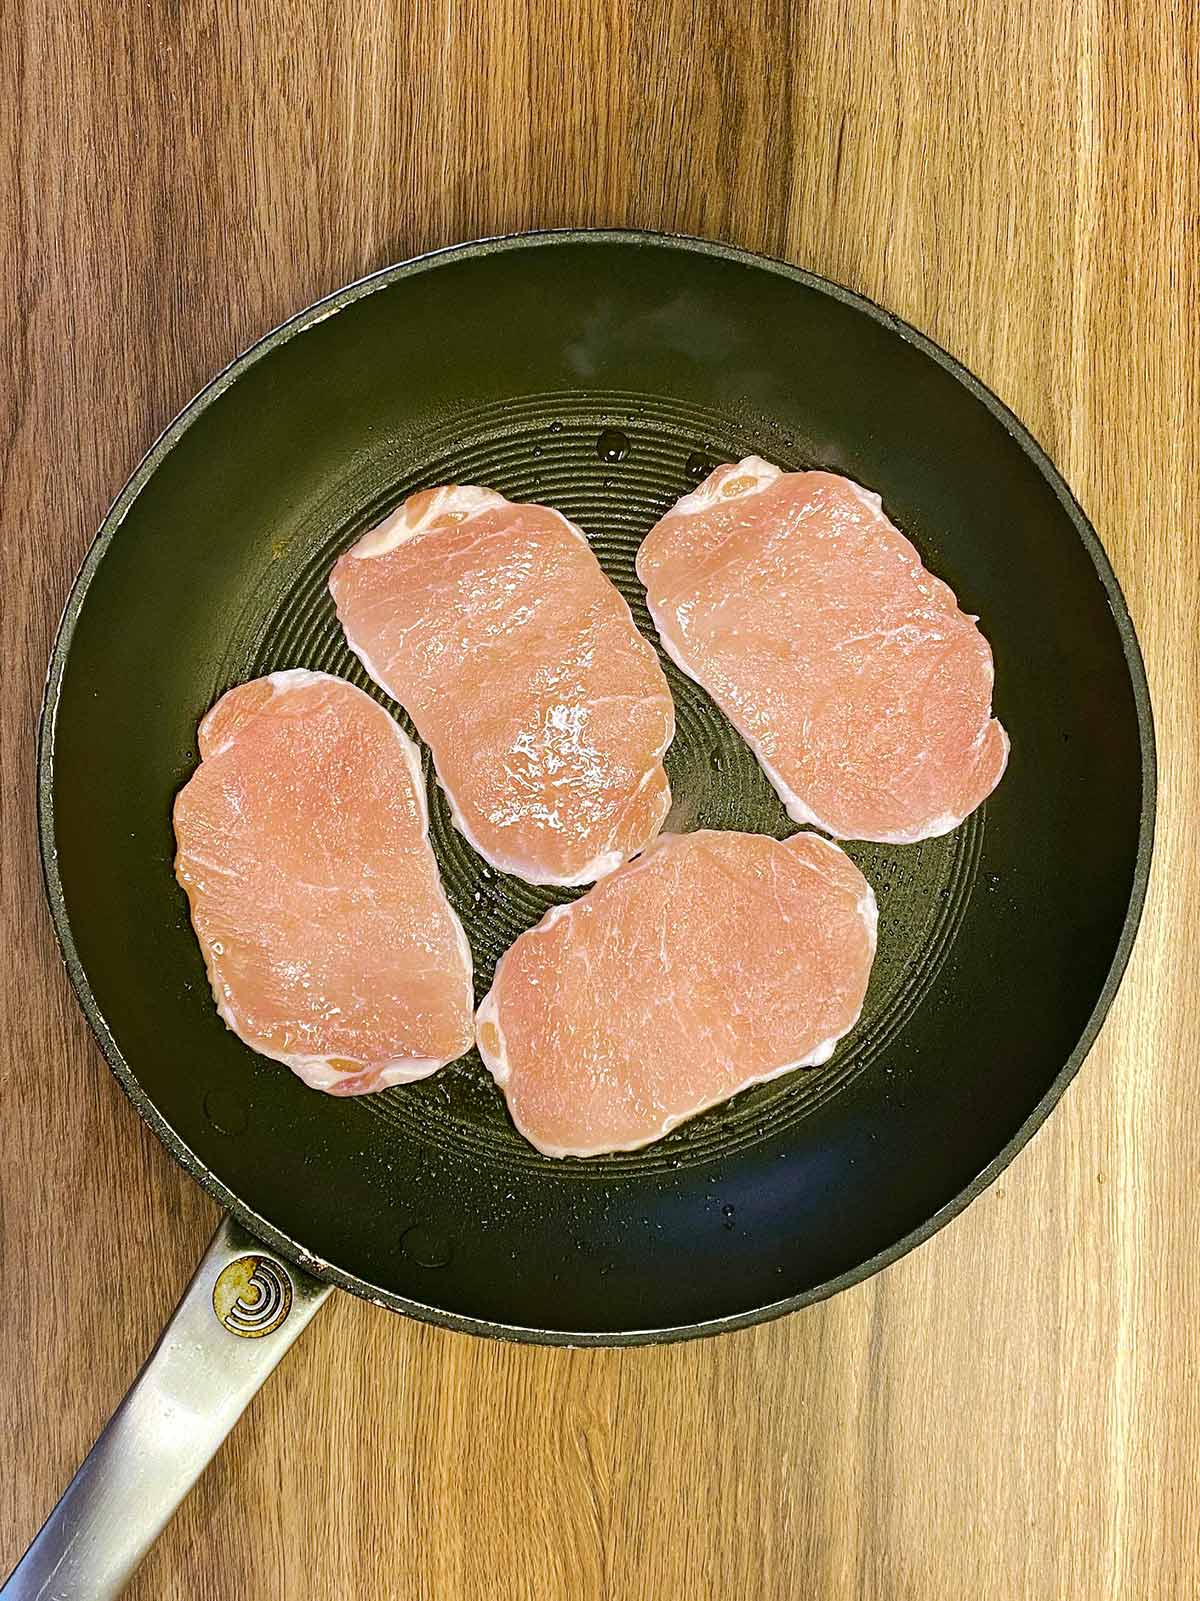 Bacon medallions cooking in a pan.